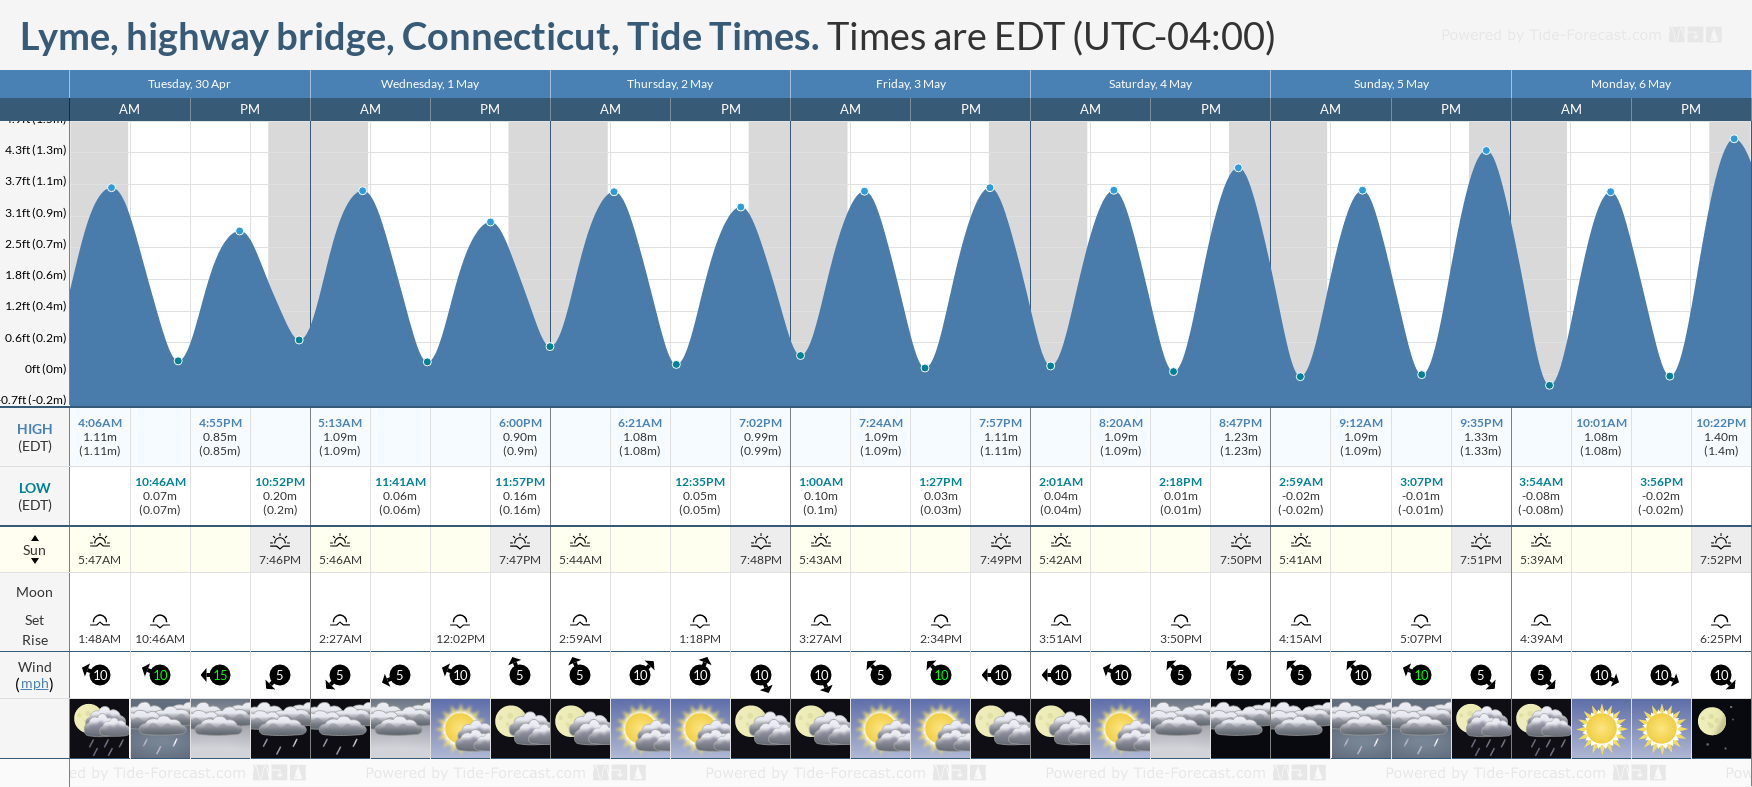 Lyme, highway bridge, Connecticut Tide Chart including high and low tide times for the next 7 days